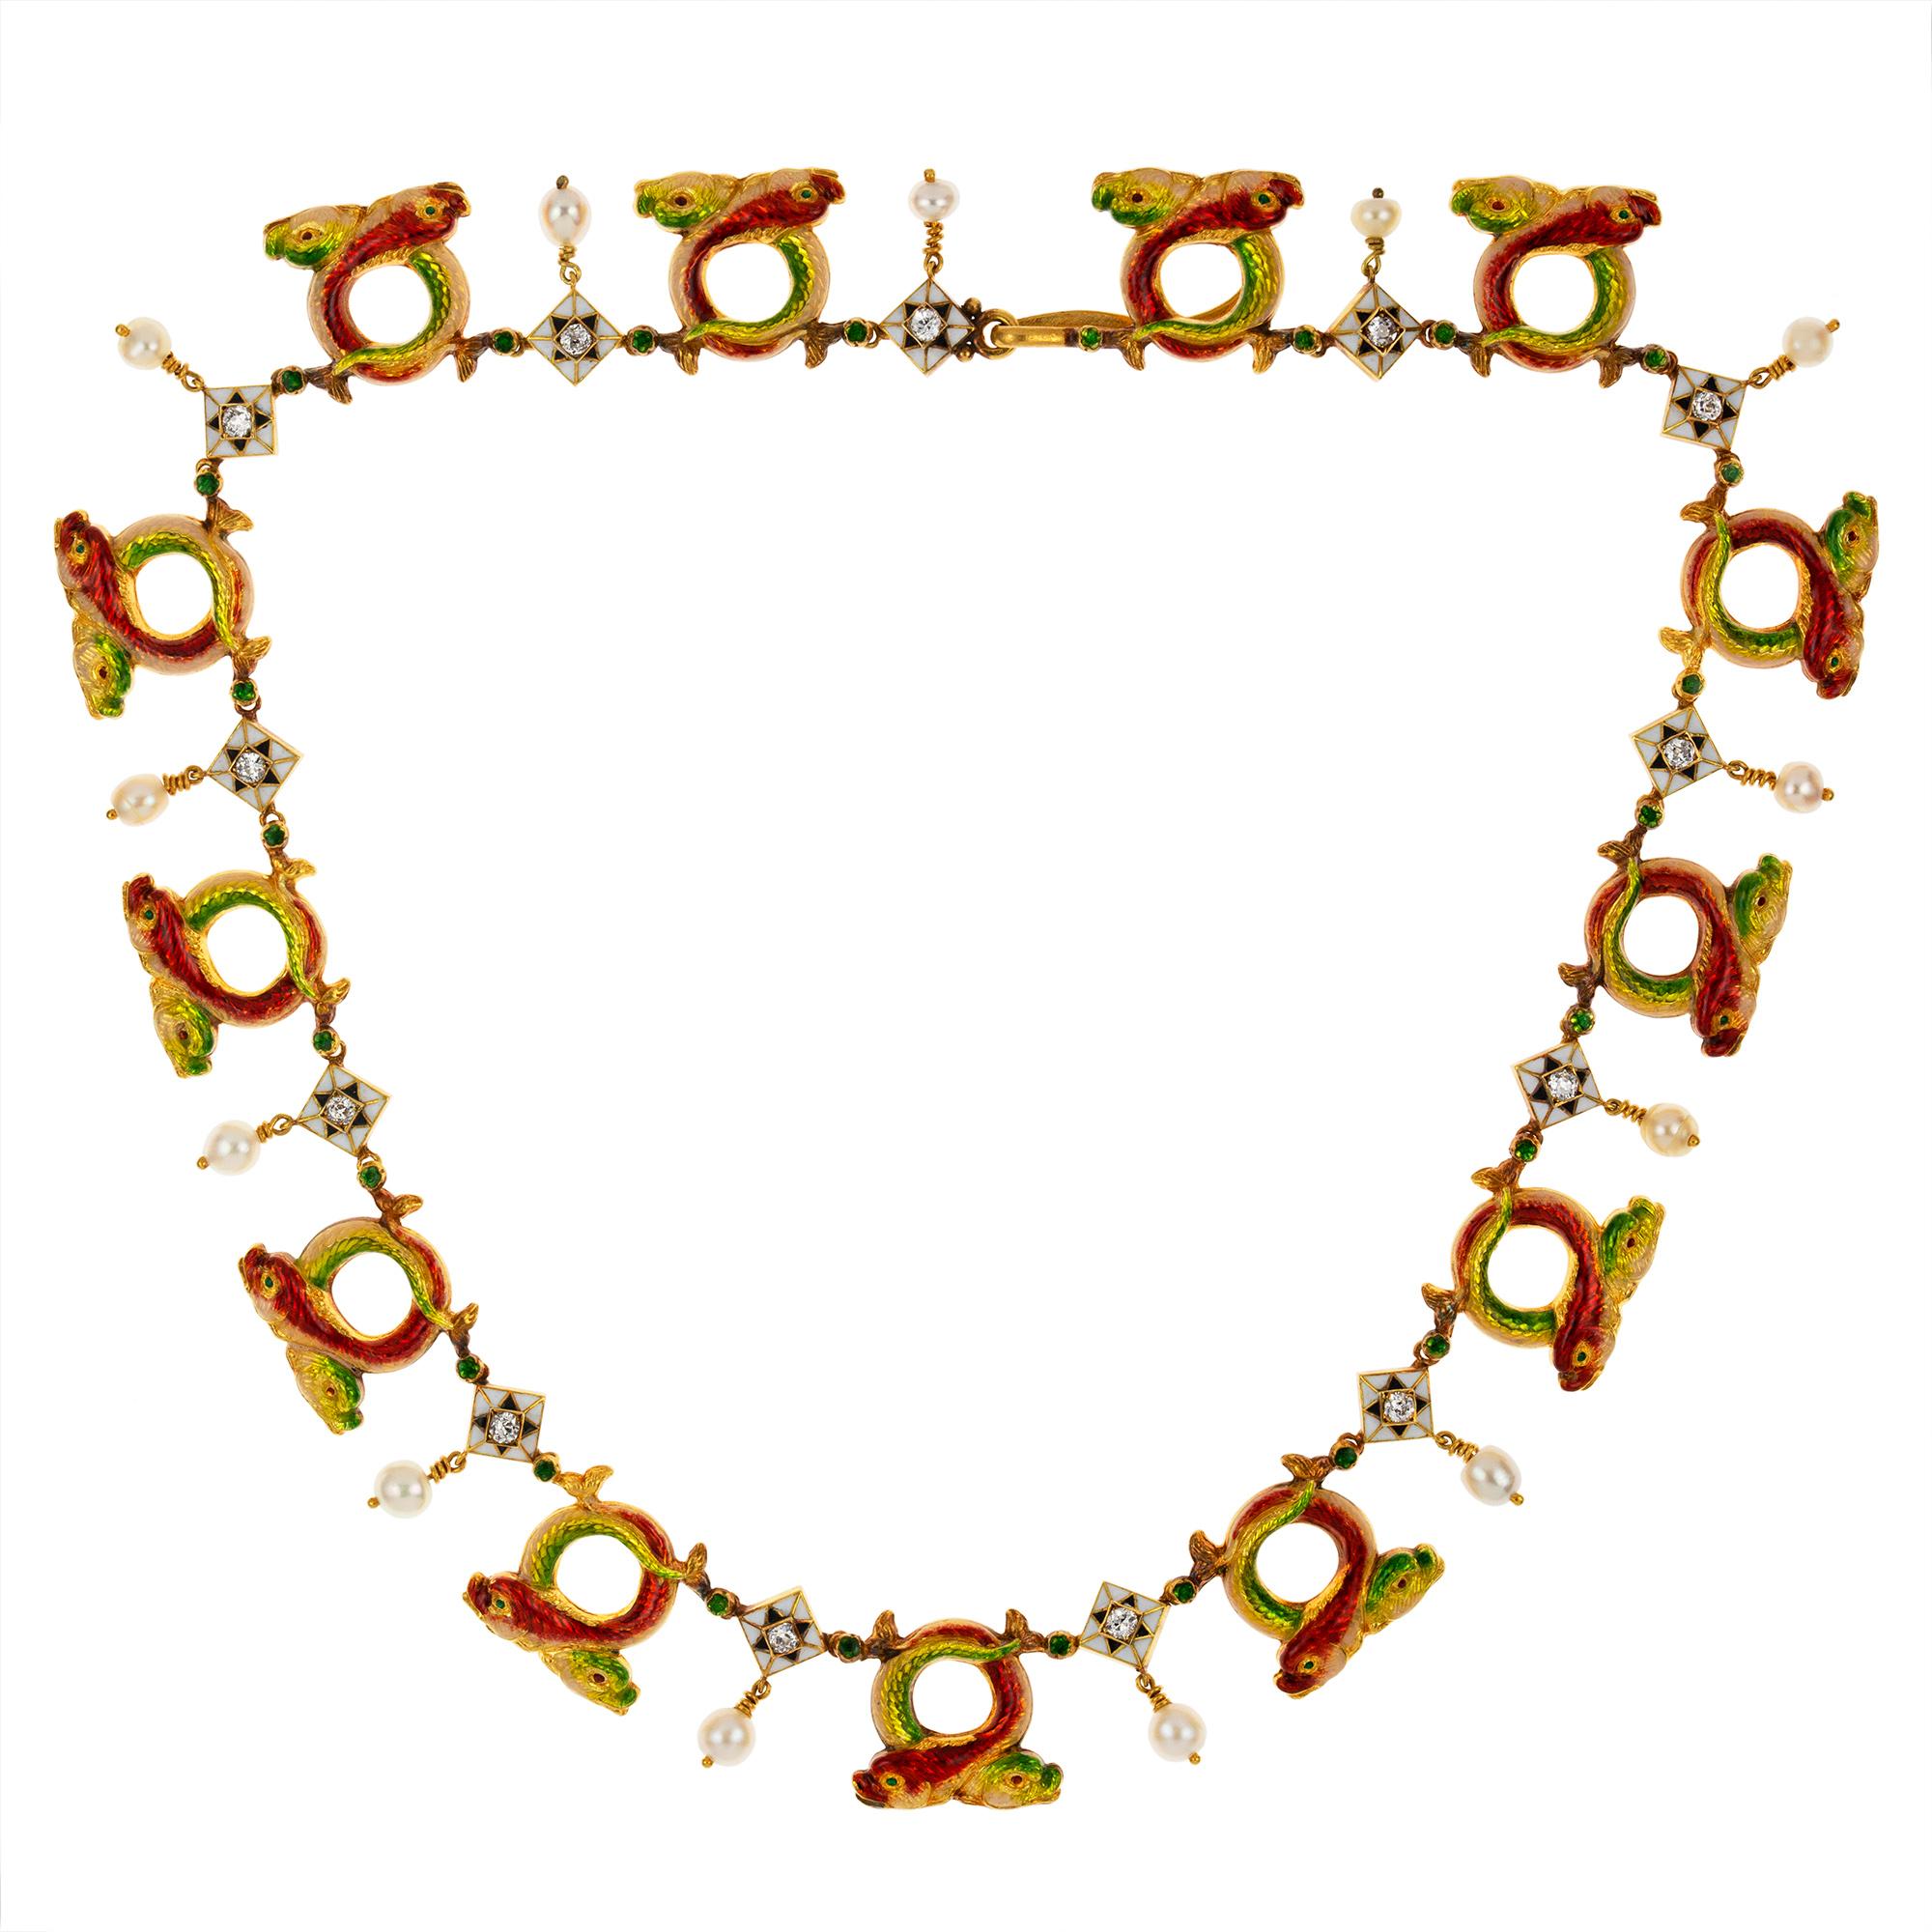 A Phillips enamelled fish necklace, the thirteen openwork links depicting two coiled fish the one enamelled in red and the other in green colours, connected with thirteen lozenge shaped links, each centrally set with an old-cut diamond surrounded by